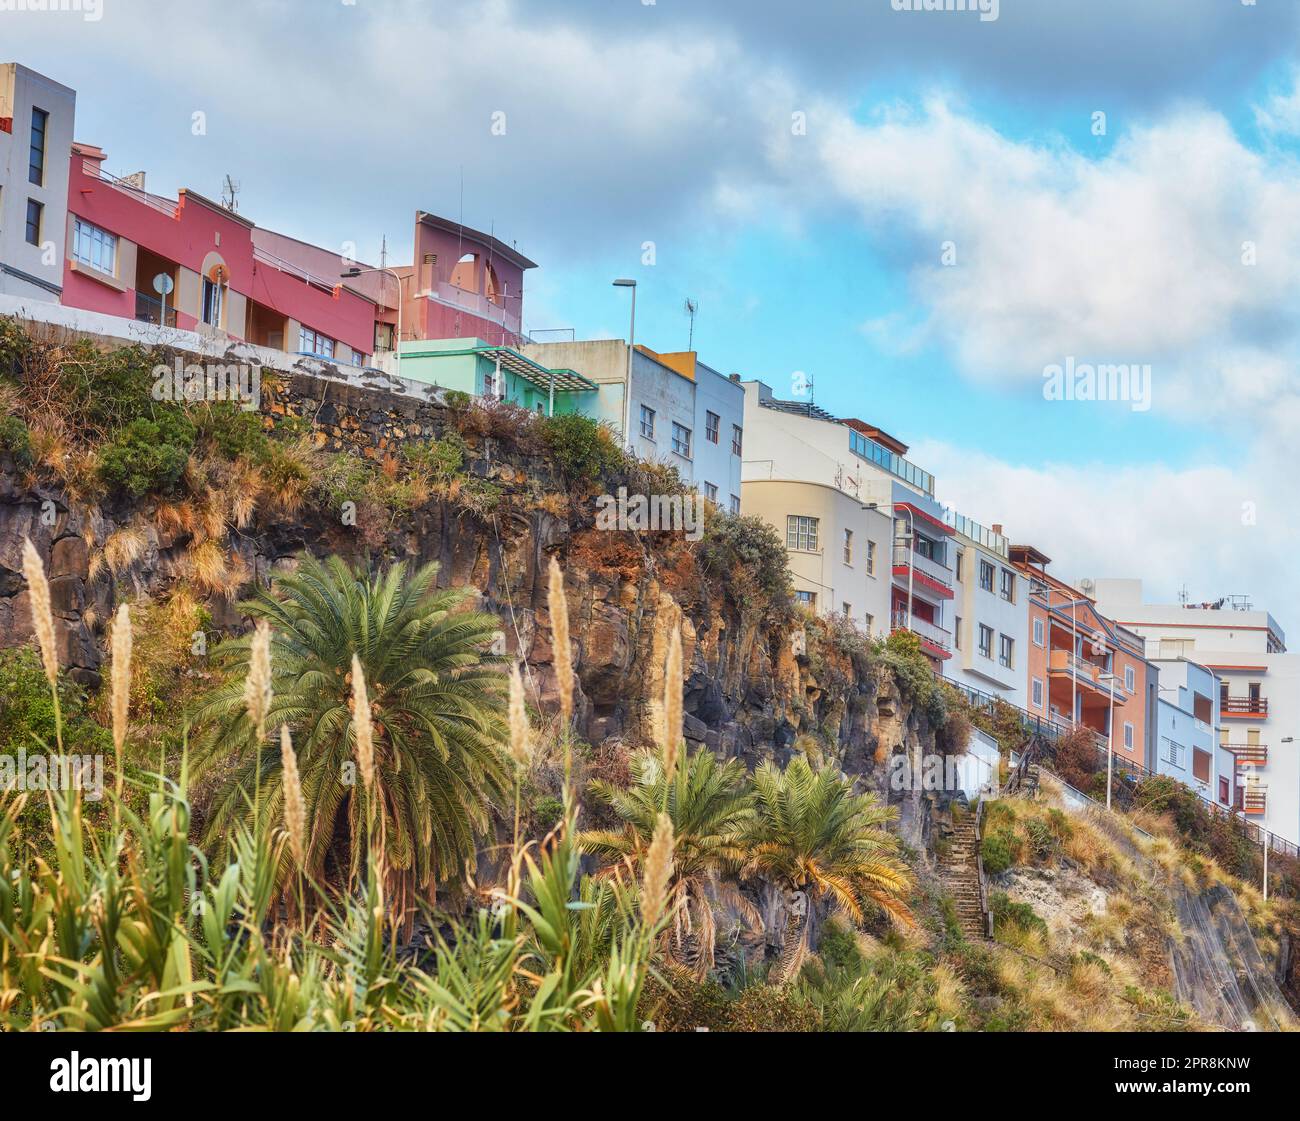 City view of residential houses or buildings on a hill cliff in Santa Cruz, La Palma, Spain. Historical spanish, colonial architecture and palm trees in tropical village of famous tourism destination Stock Photo